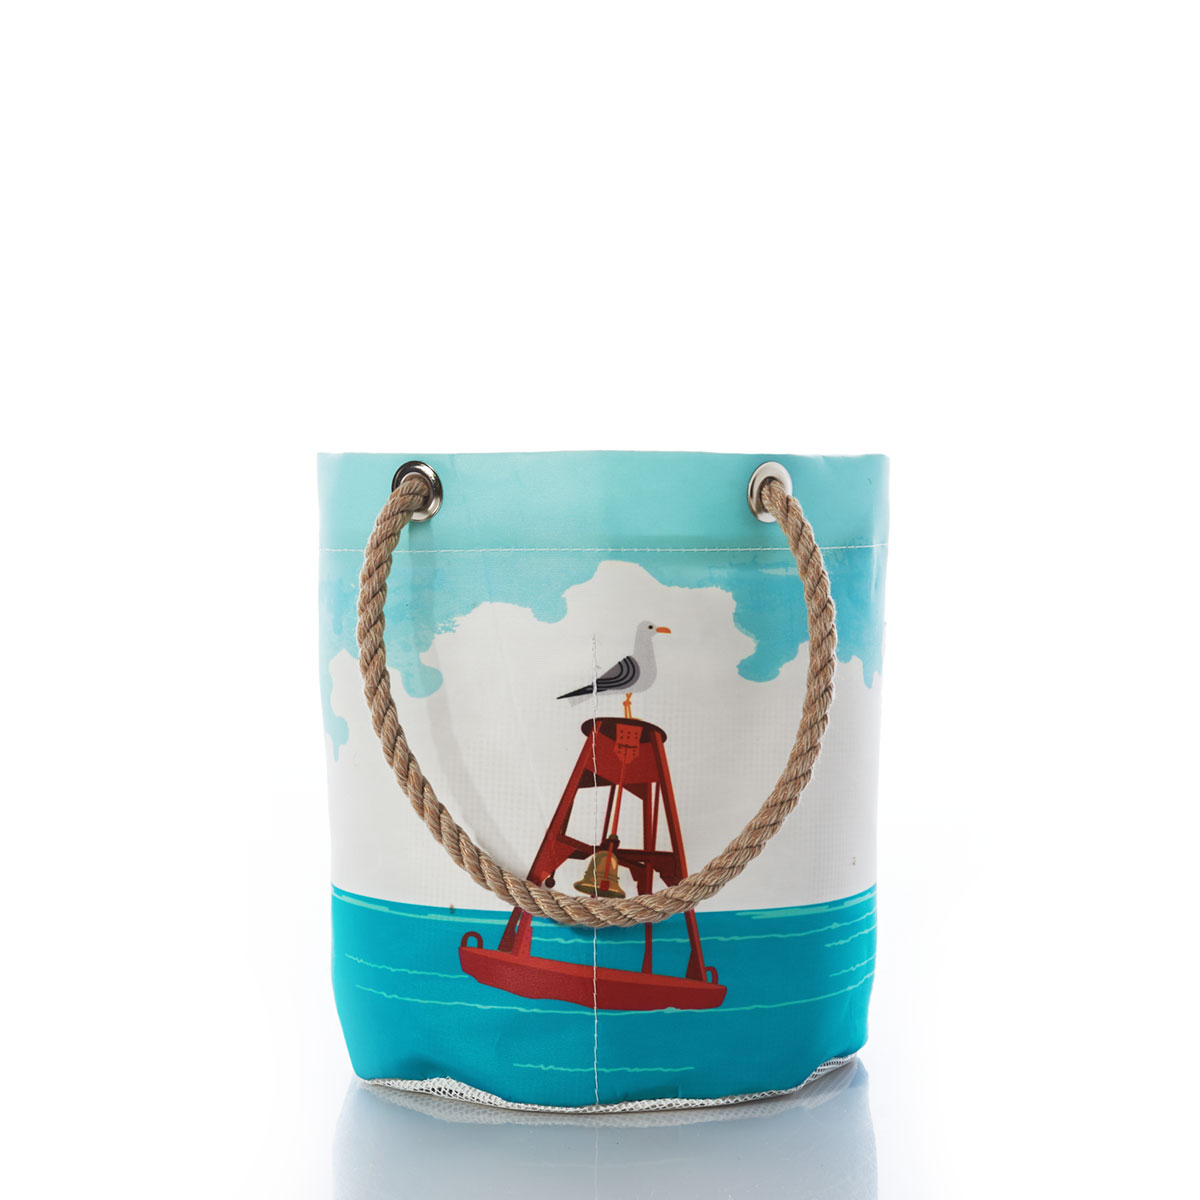 a recycled sail cloth beachcomber bucket with hemp rope handles is printed with an ocean scene and a red bell buoy floats with a seagull perched on top